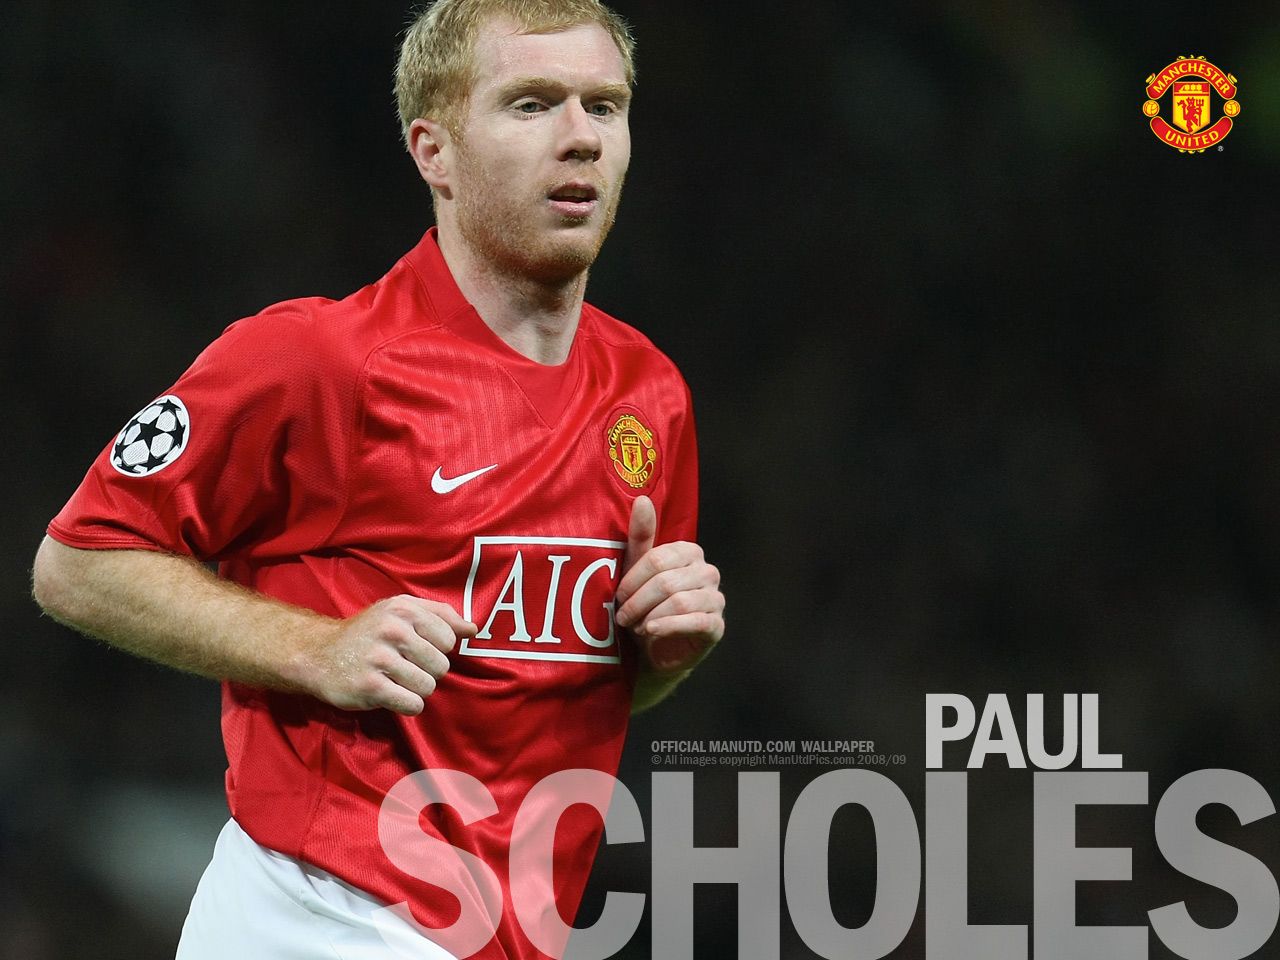 Manchester United First Team Squad Wallpaper - Manchester United Paul Scholes Hd - HD Wallpaper 